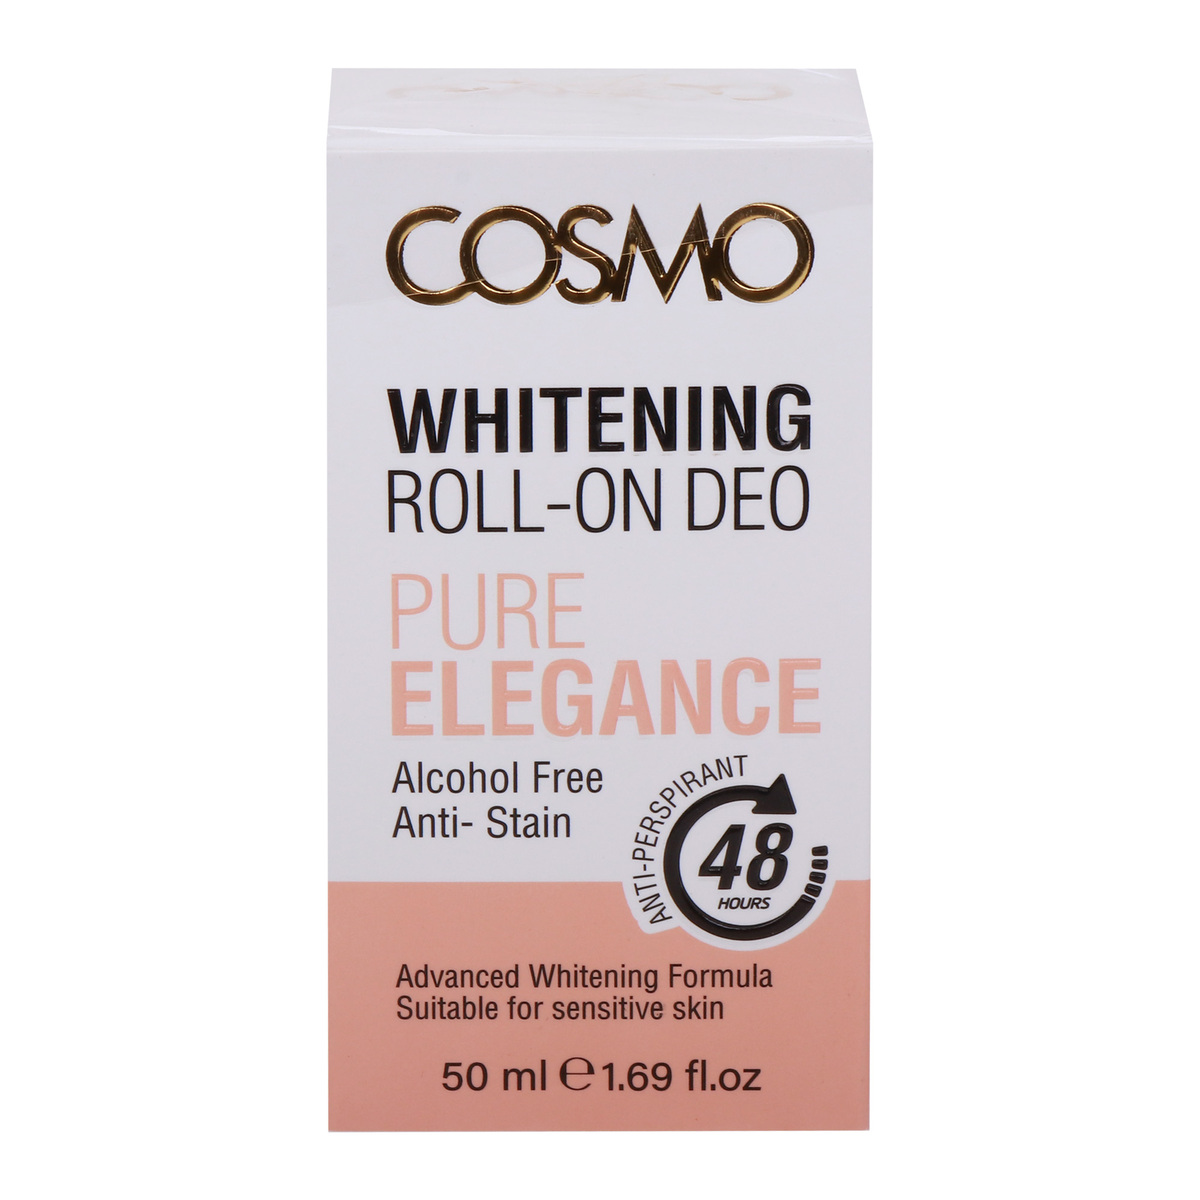 Cosmo Whitening Roll-On Deo Pure Elegance 50 ml